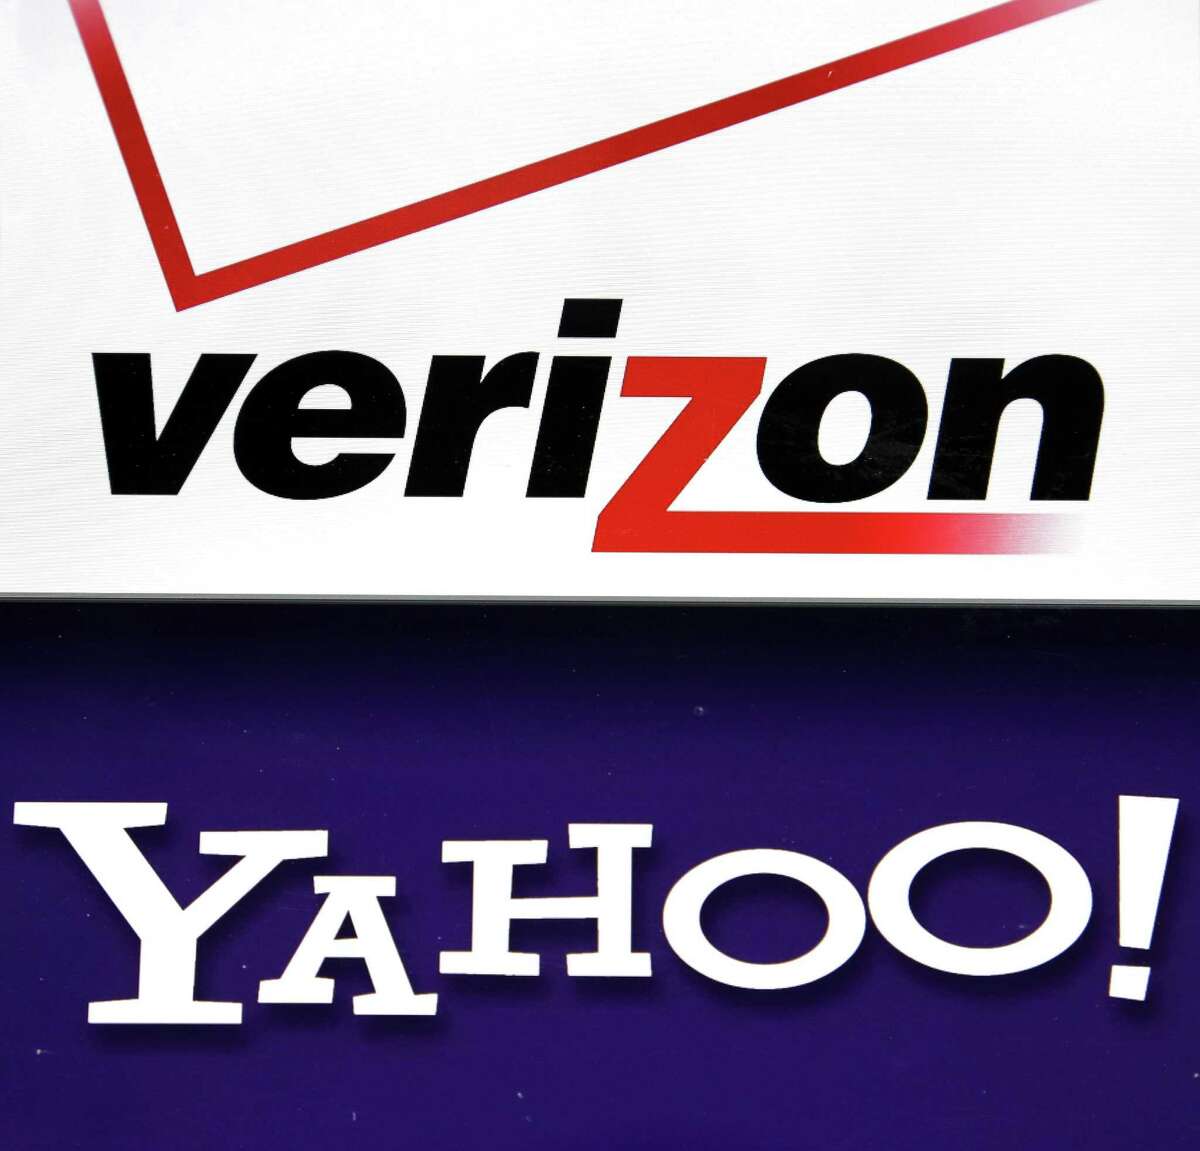 Verizon Communications Inc. is getting close to a renegotiated deal for Yahoo Inc.’s internet properties that would reduce the price of the original $4.8 billion deal by about $250 million, according to people familiar with the matter. Their logos are shown on a laptop.